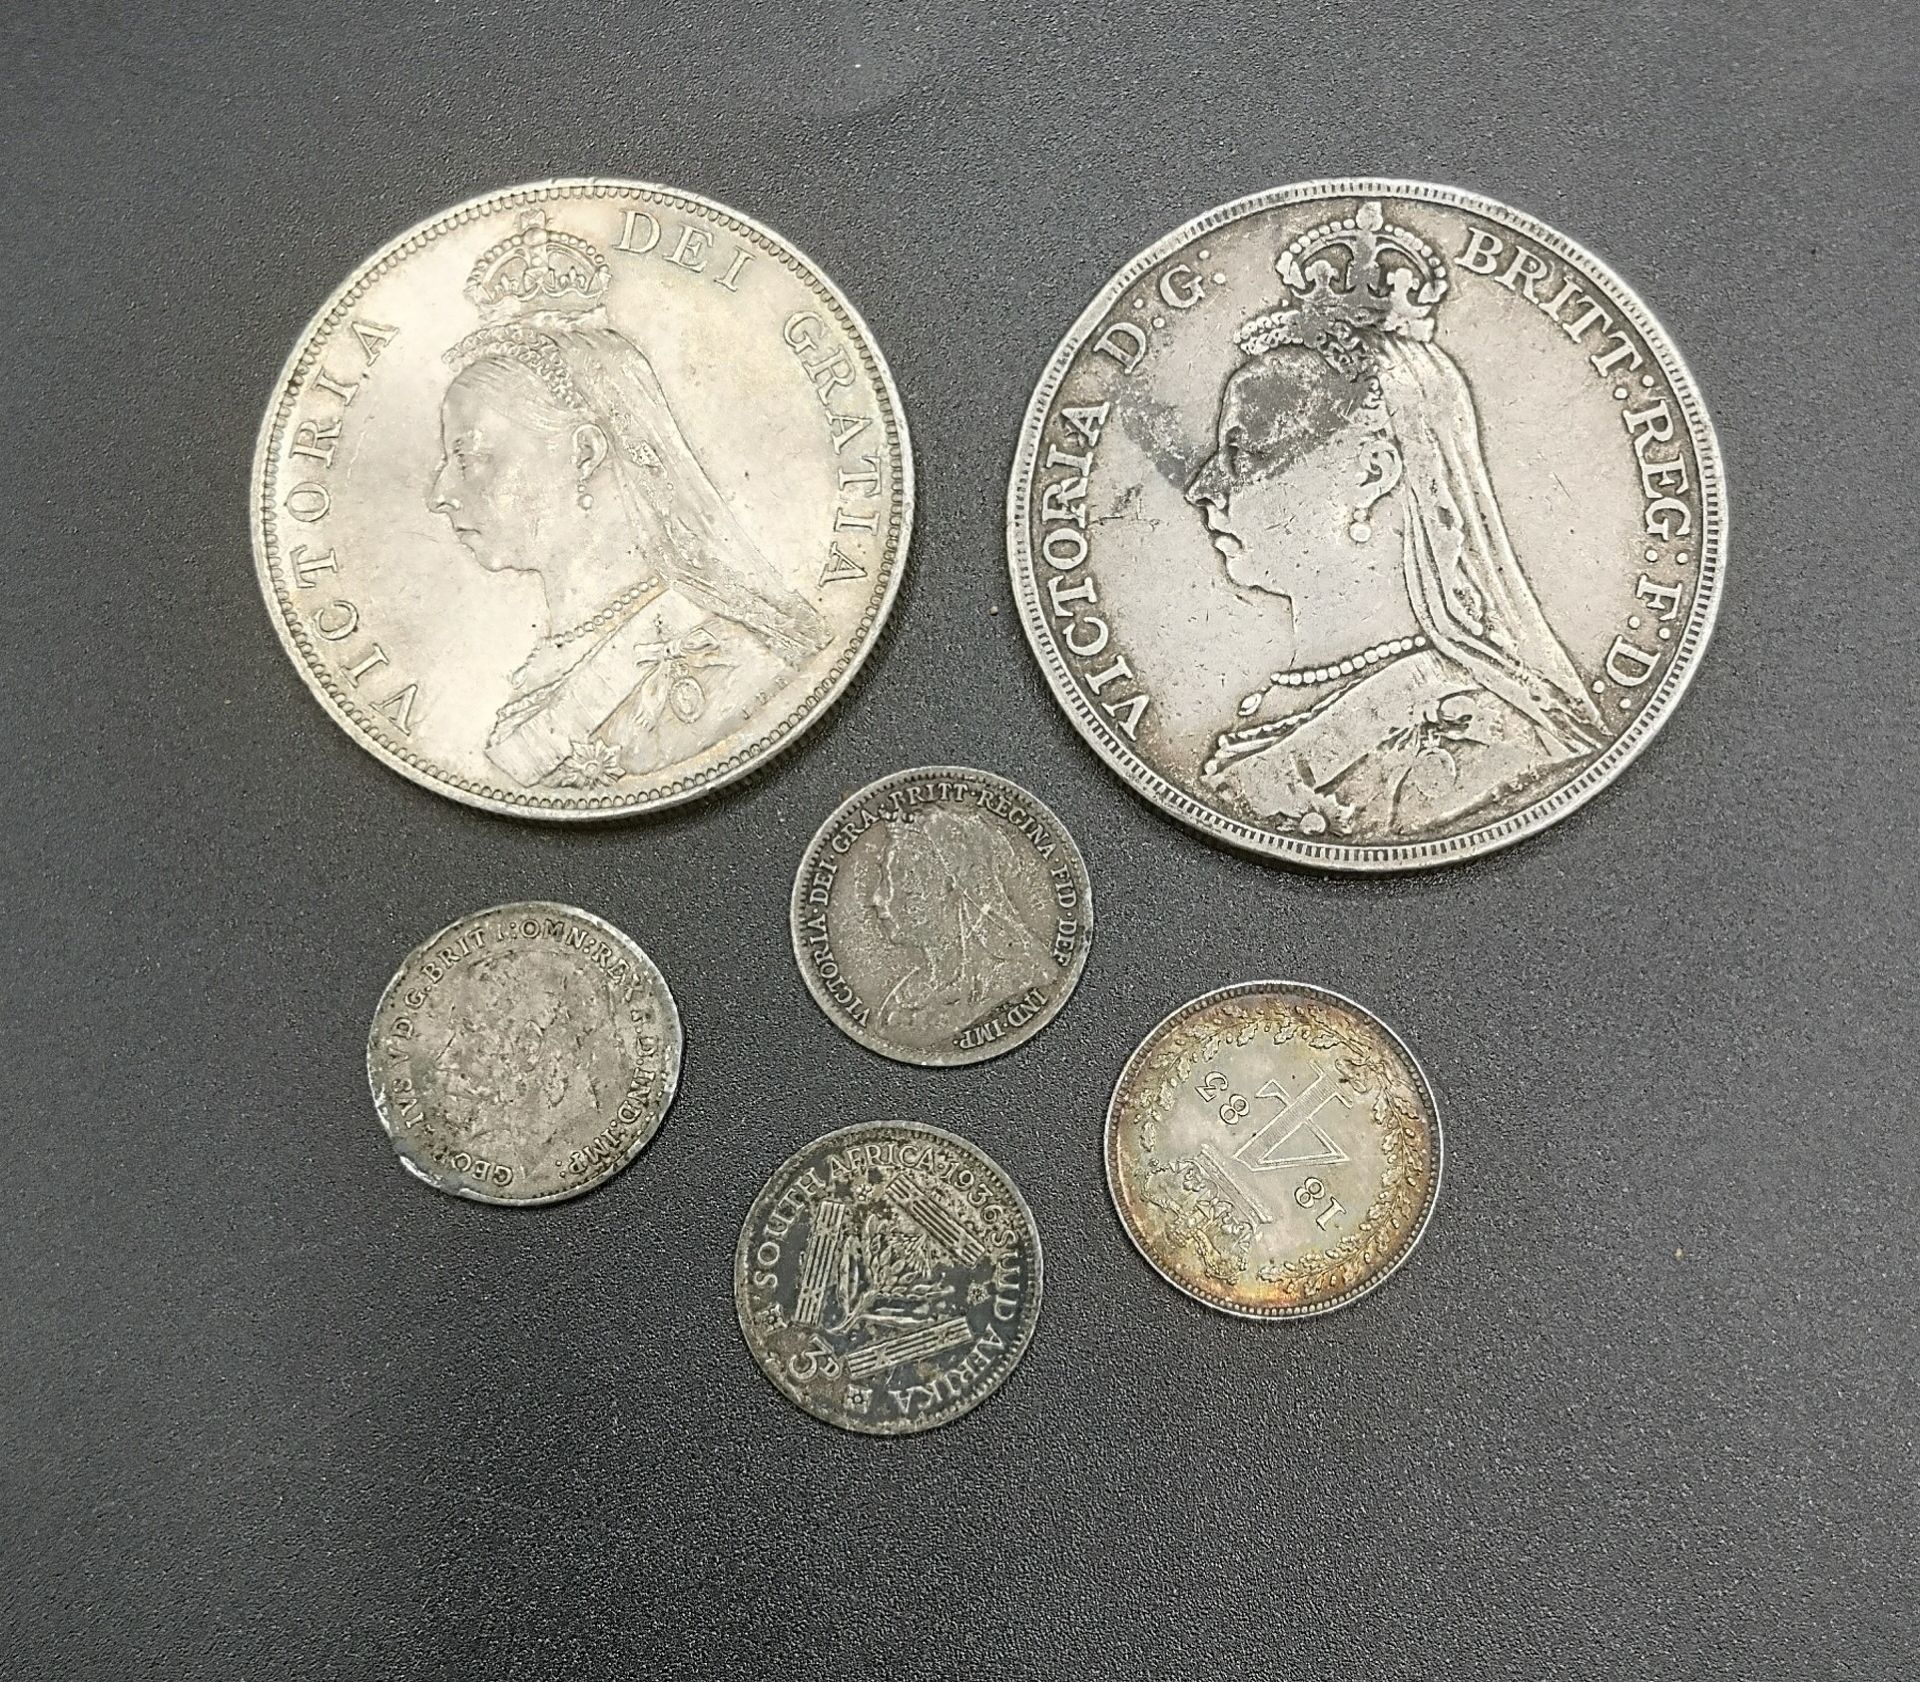 Queen Victoria crown 1890, double florin 1889, and 4 other silver coins - Image 6 of 8